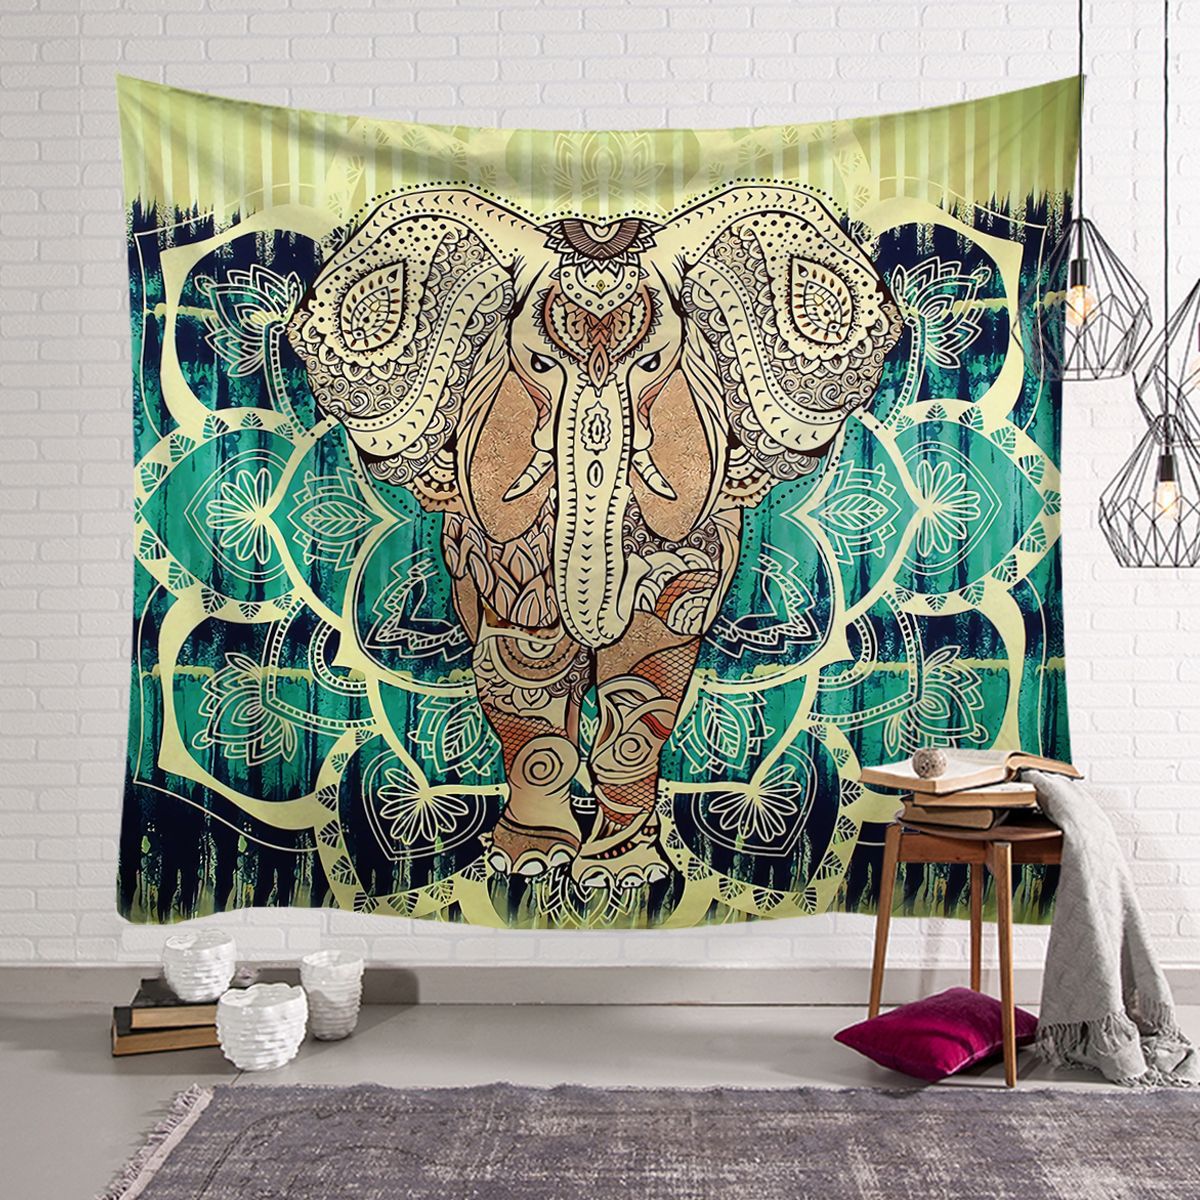 Unique Tapestry | Hanging Wall Decoration Cloth Wild Animals|  African  & Indian Elephant Landscape Scenery Wall